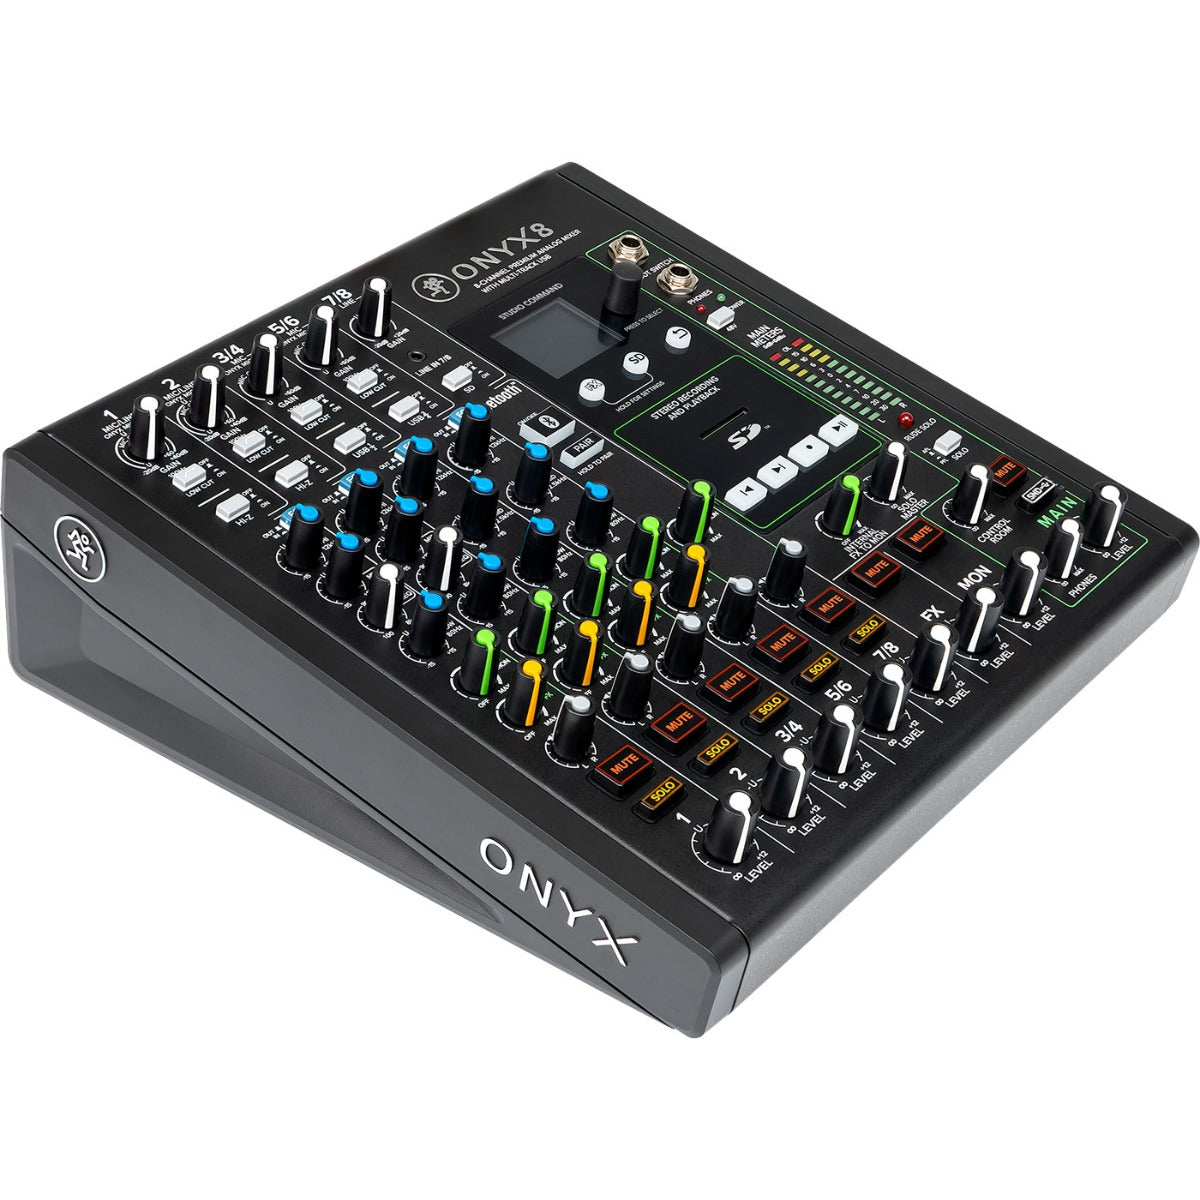 3/4 view of Mackie Onyx8 8-Channel Analog Mixer w/Multitrack USB showing top, left side and front